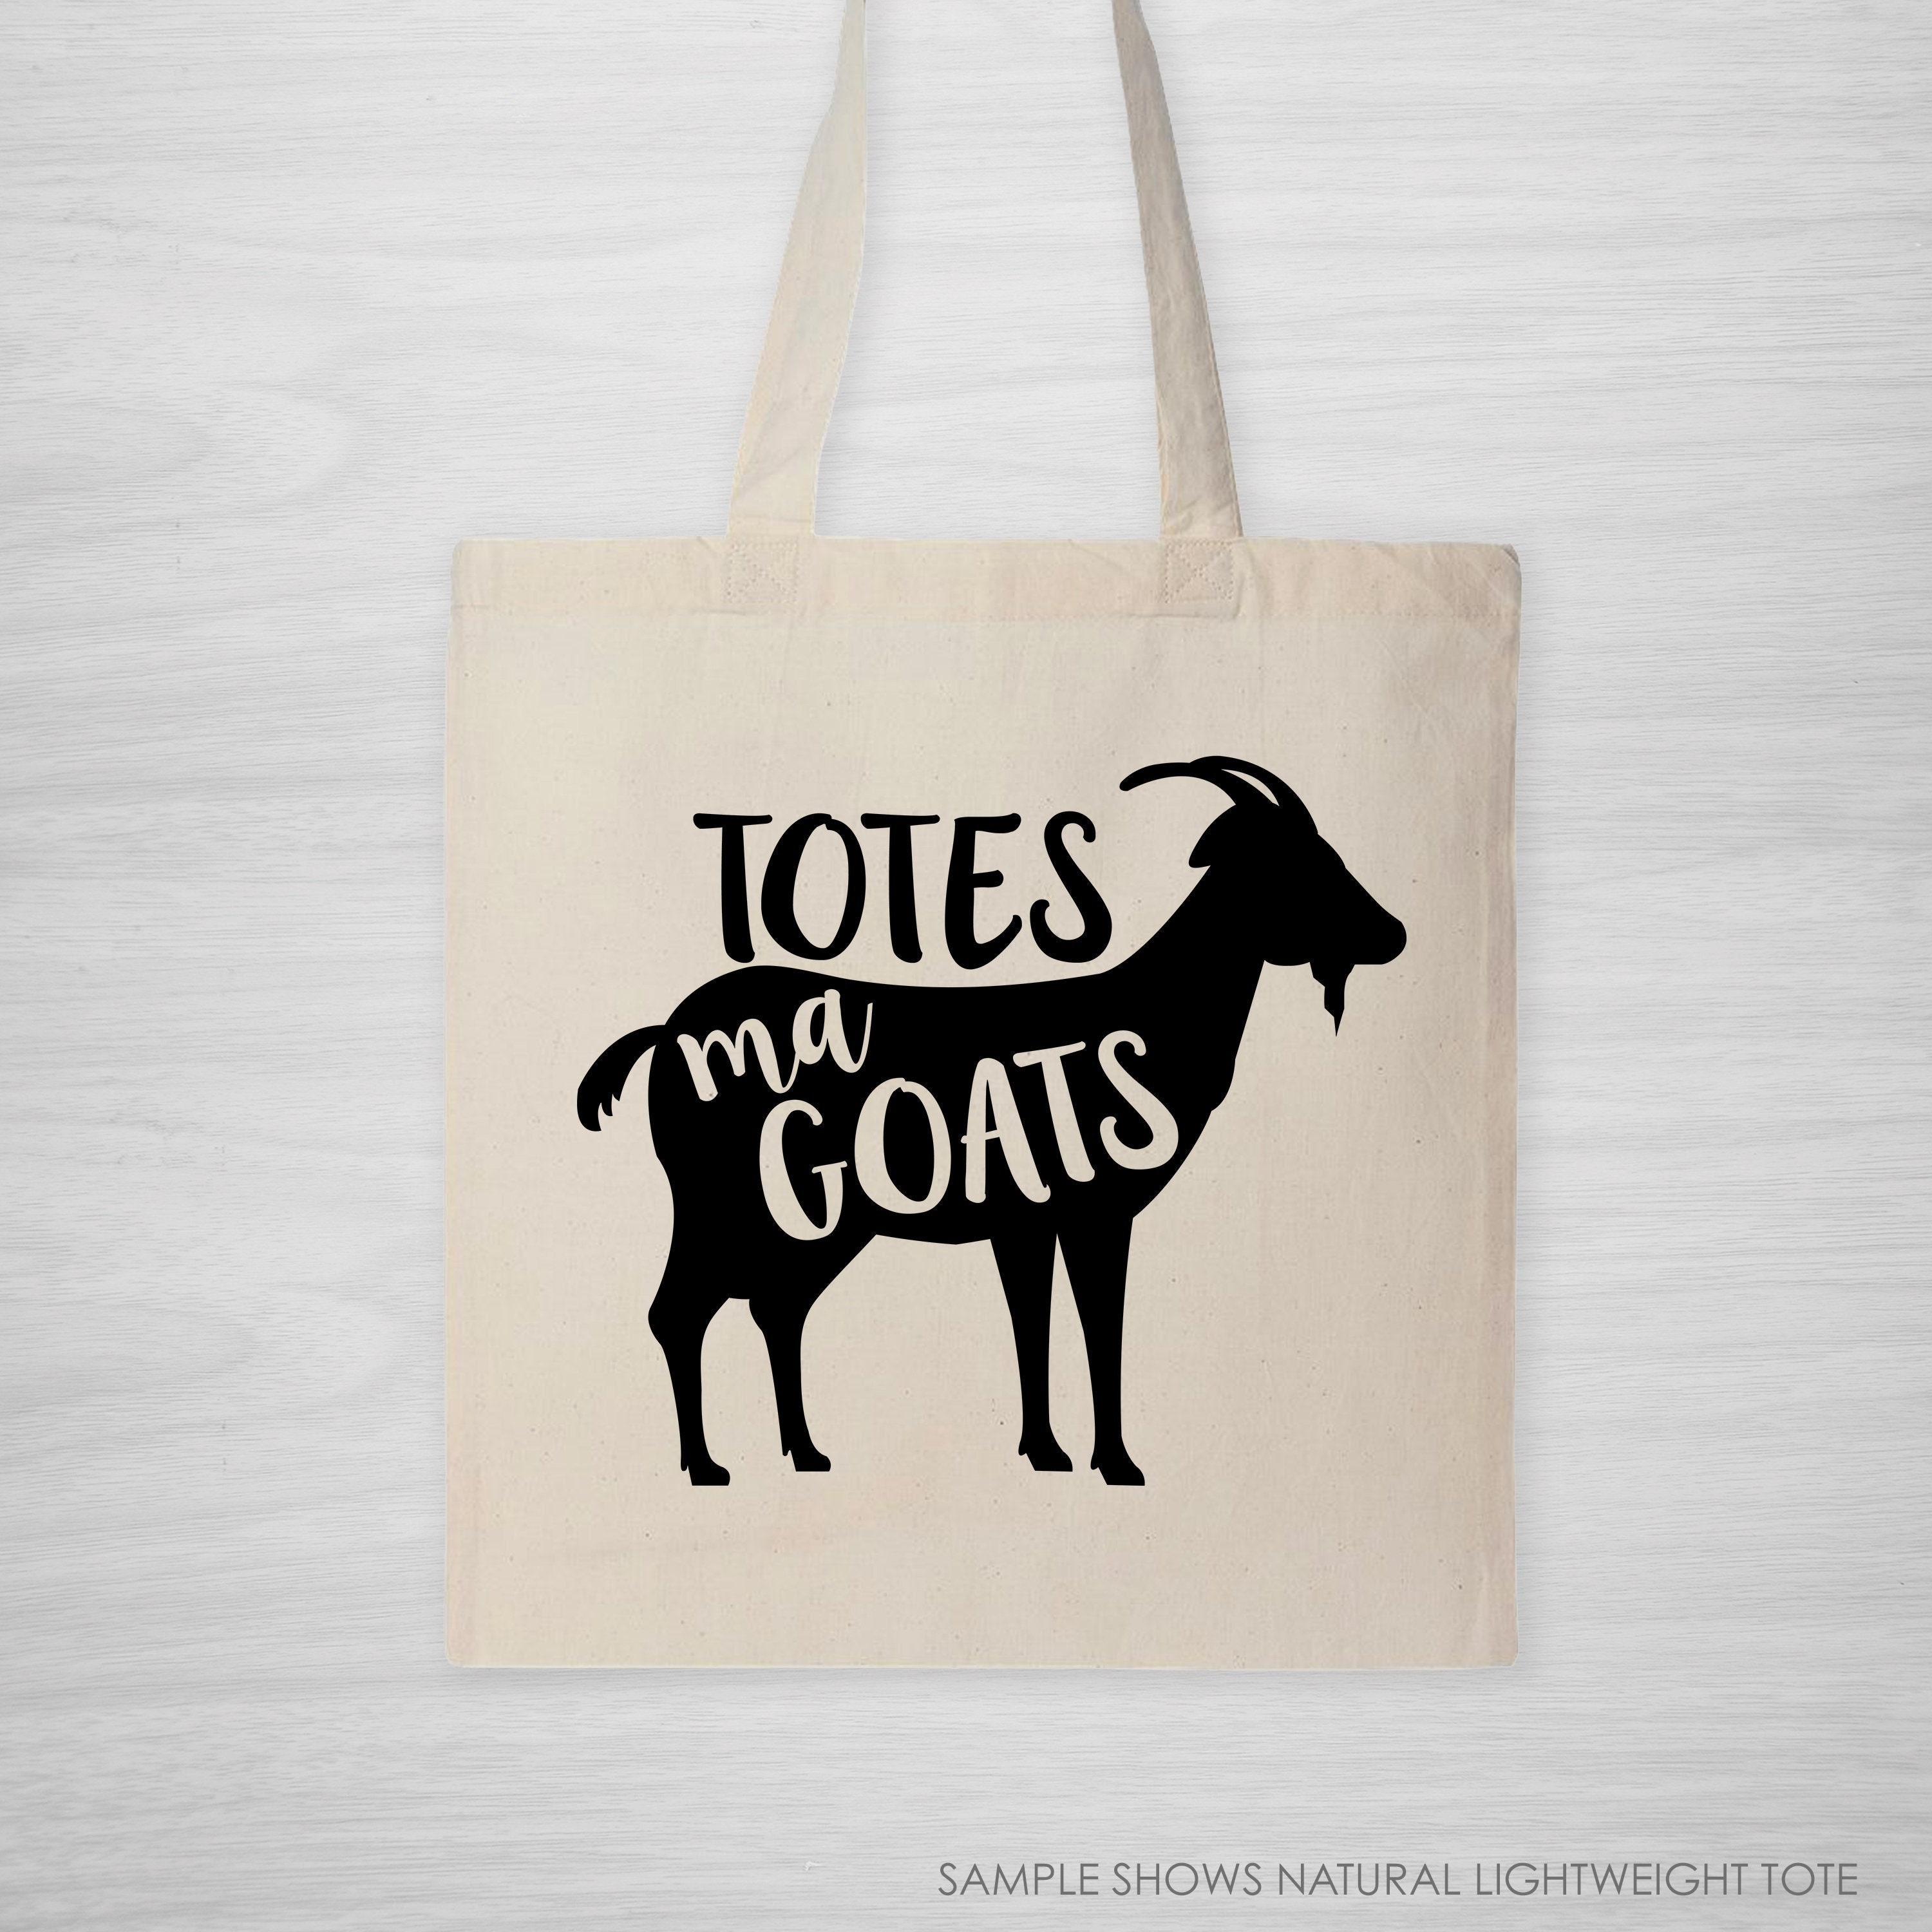 How to Inspire Word-of-Mouth Marketing with Custom Tote Bags